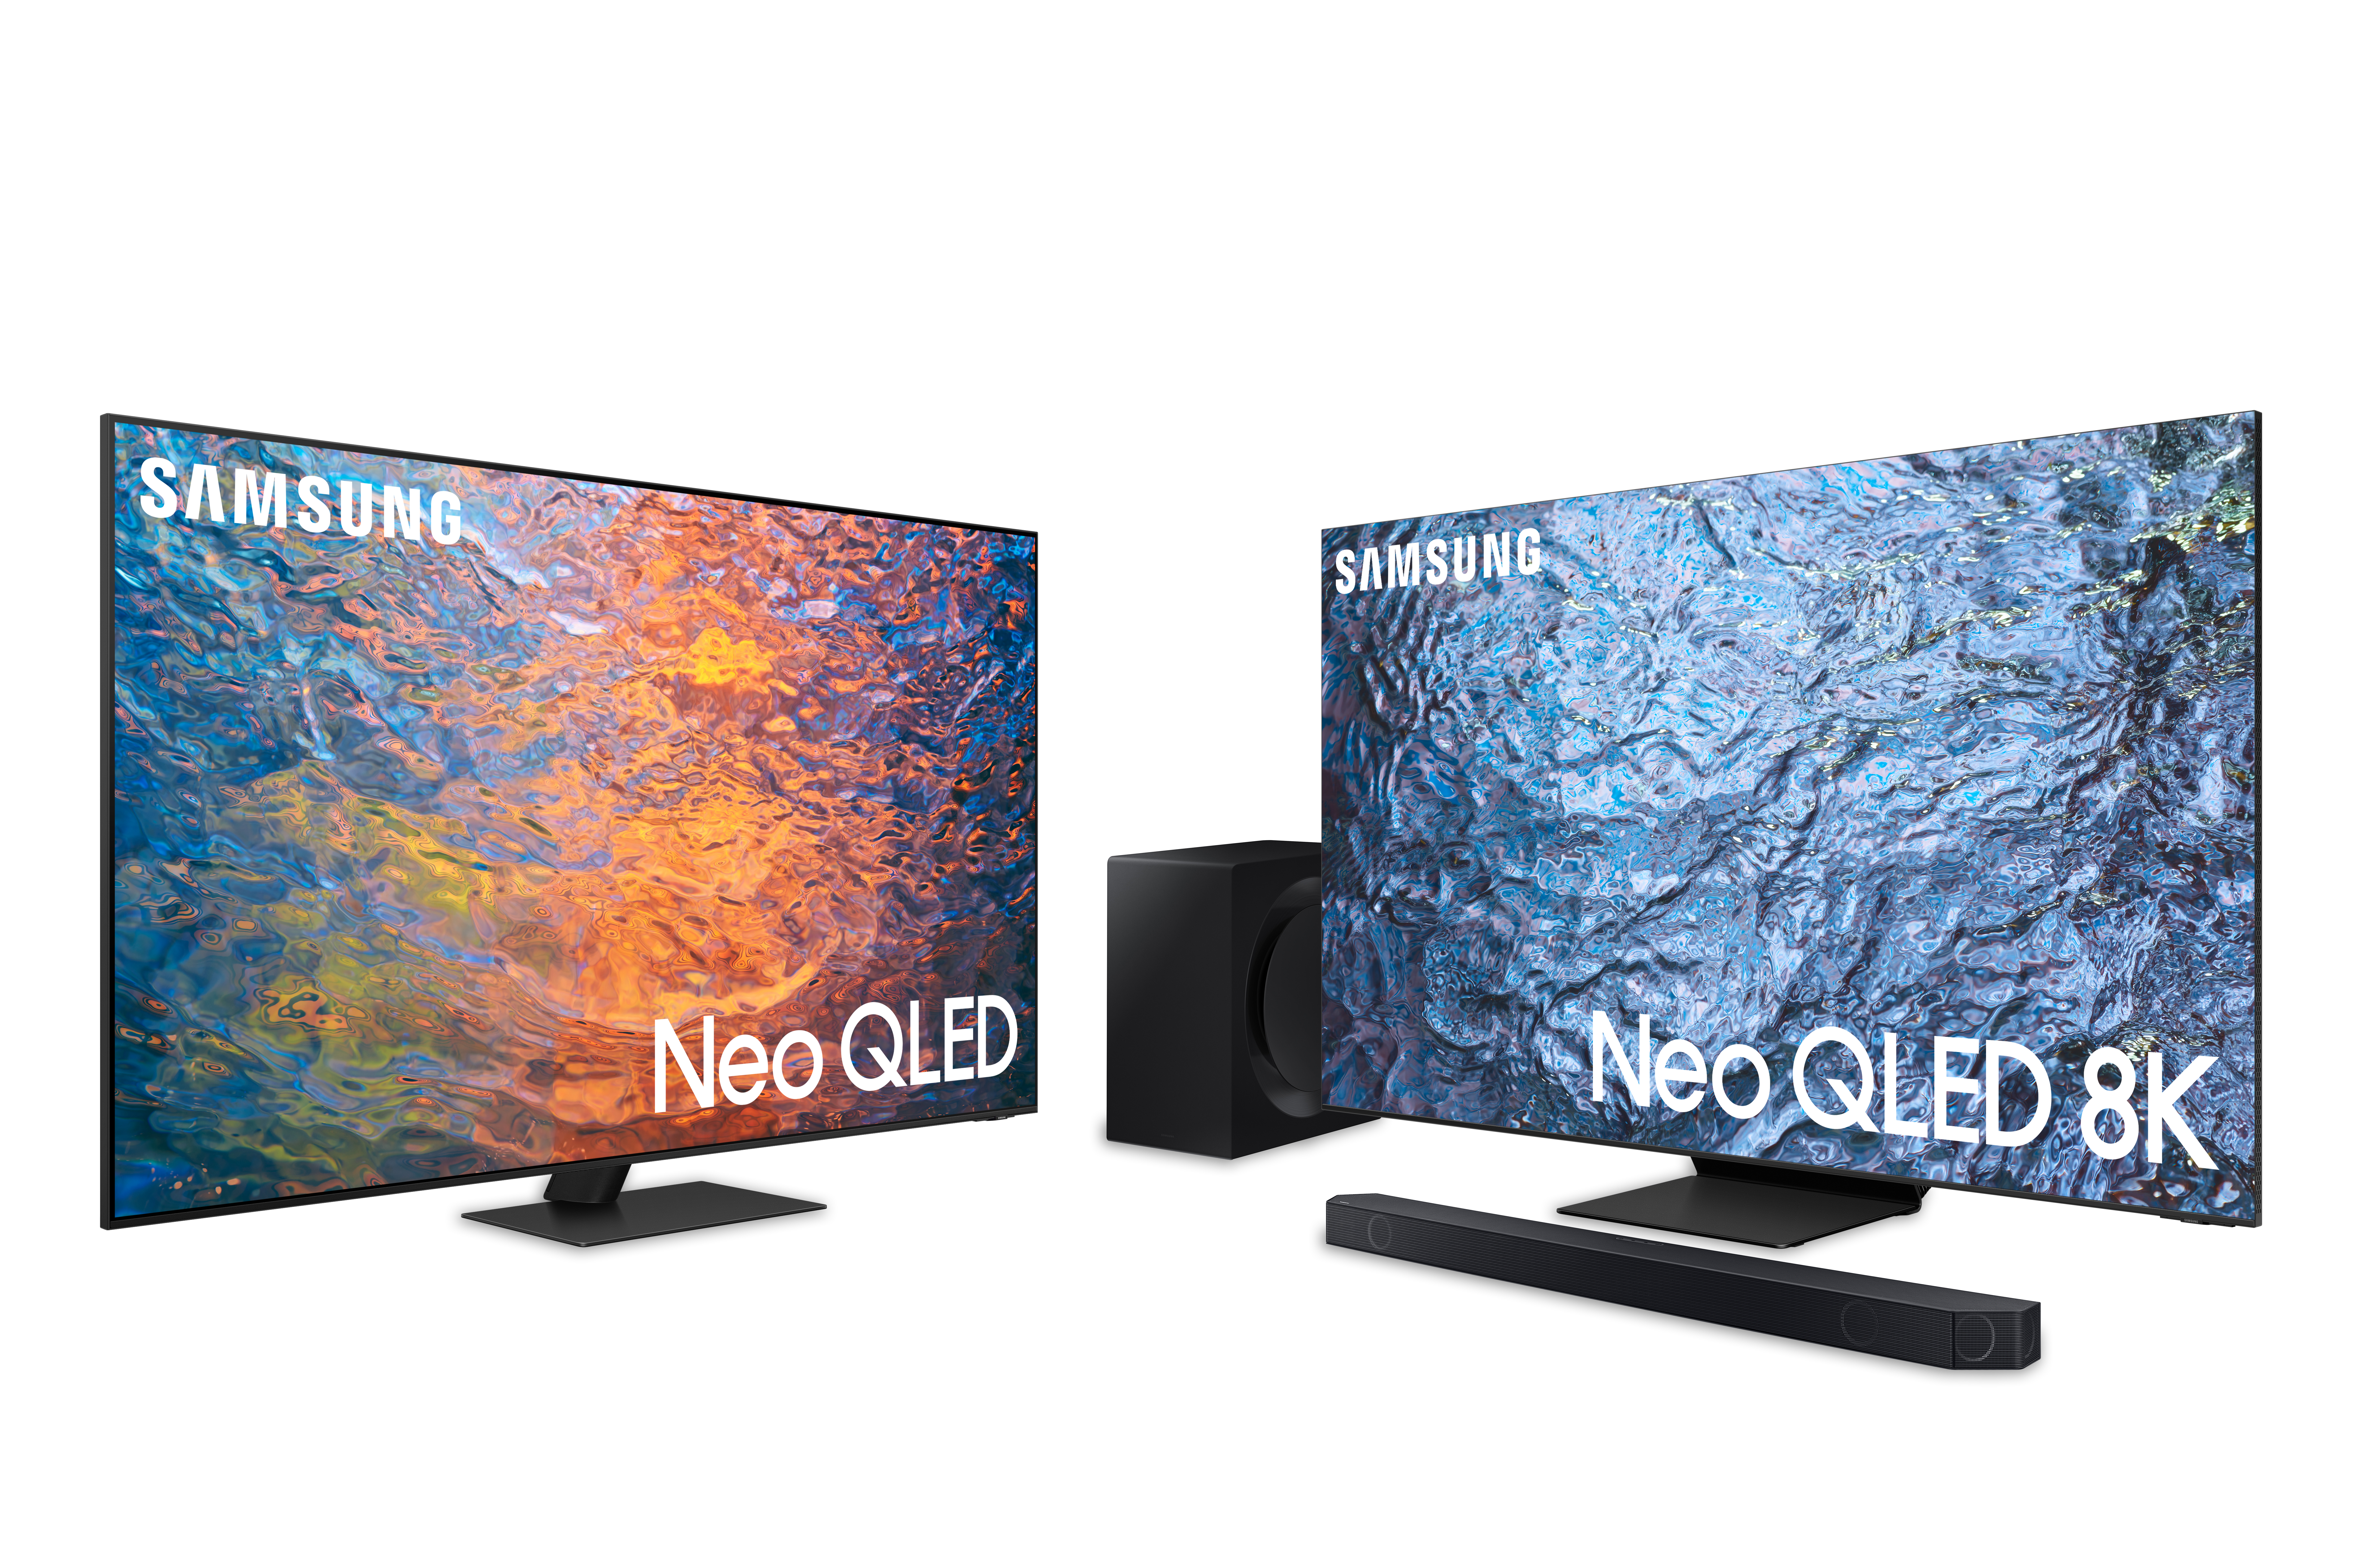 Samsung Begins Rollout Of Neo QLED 8K And 4K TVs – TWICE